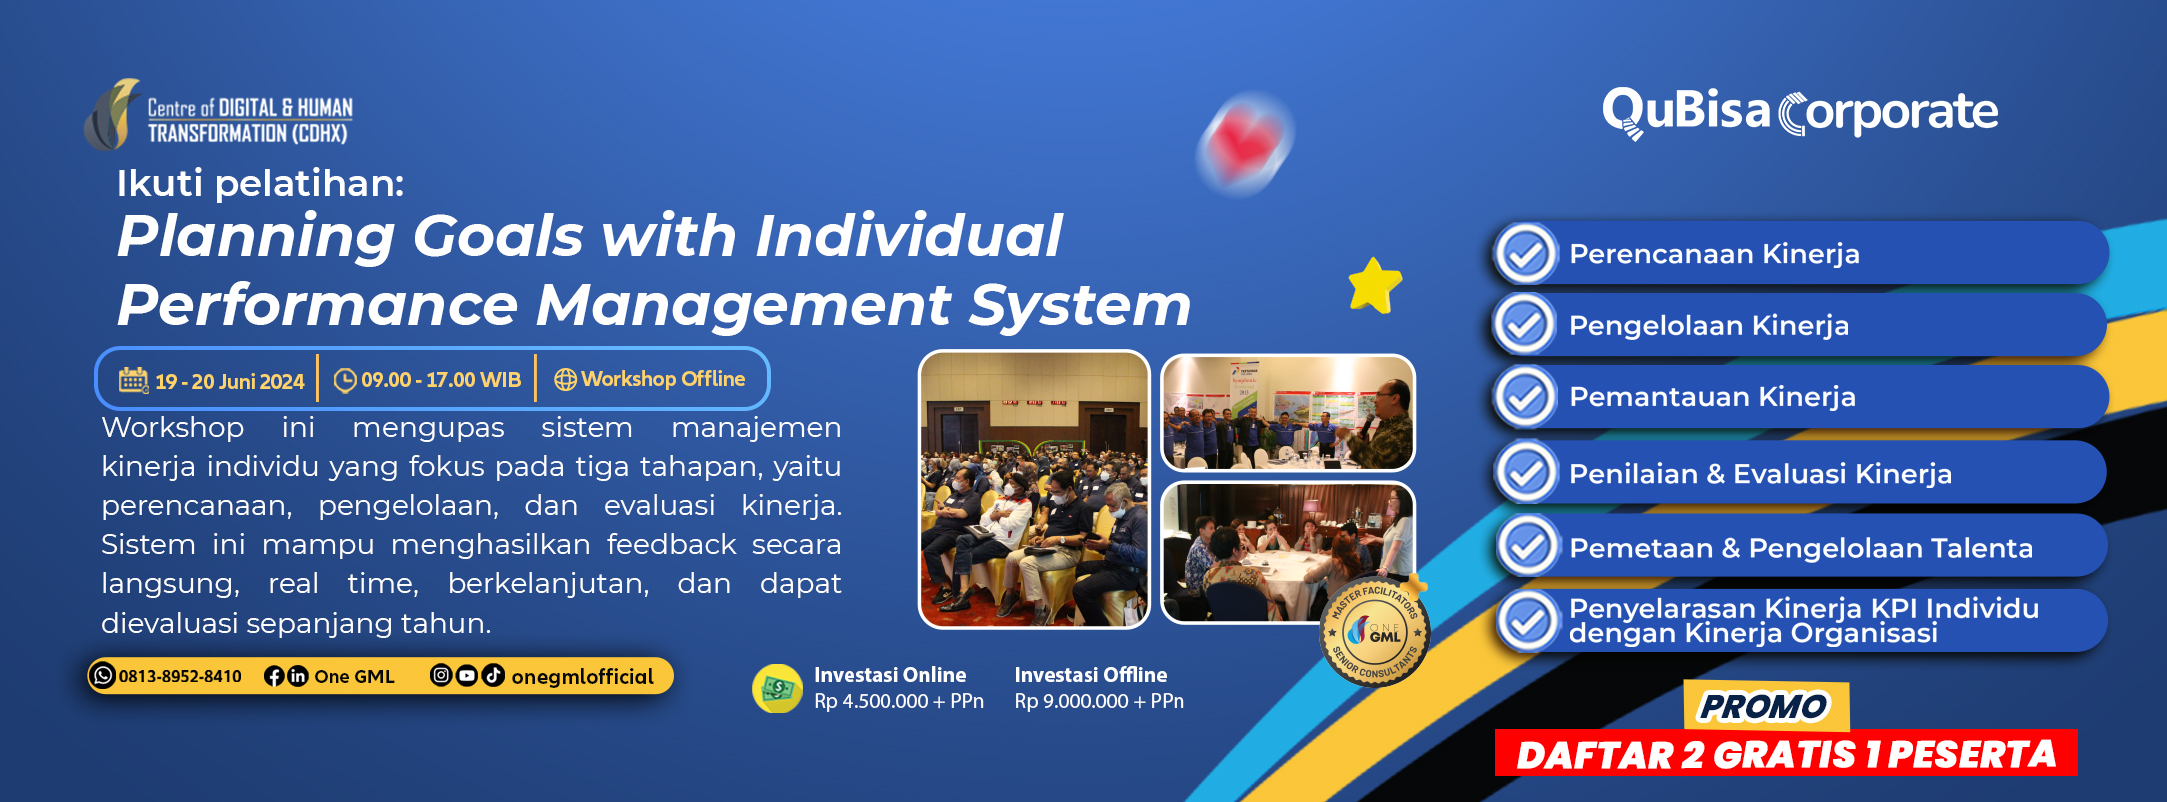 02. Planning Goals with Individual Performance Management System Web.jpg